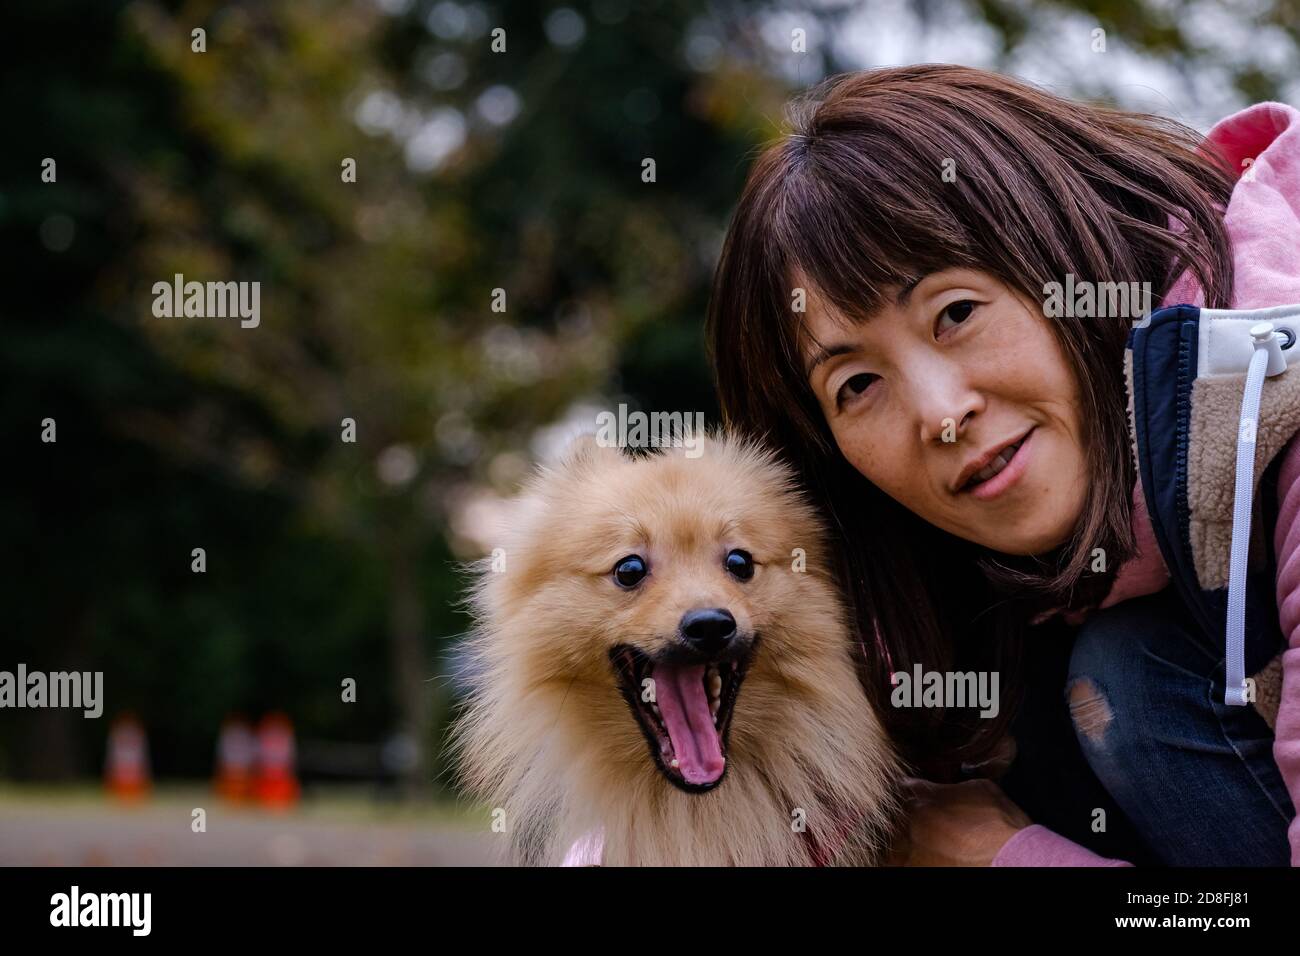 A girl and her dog Stock Photo